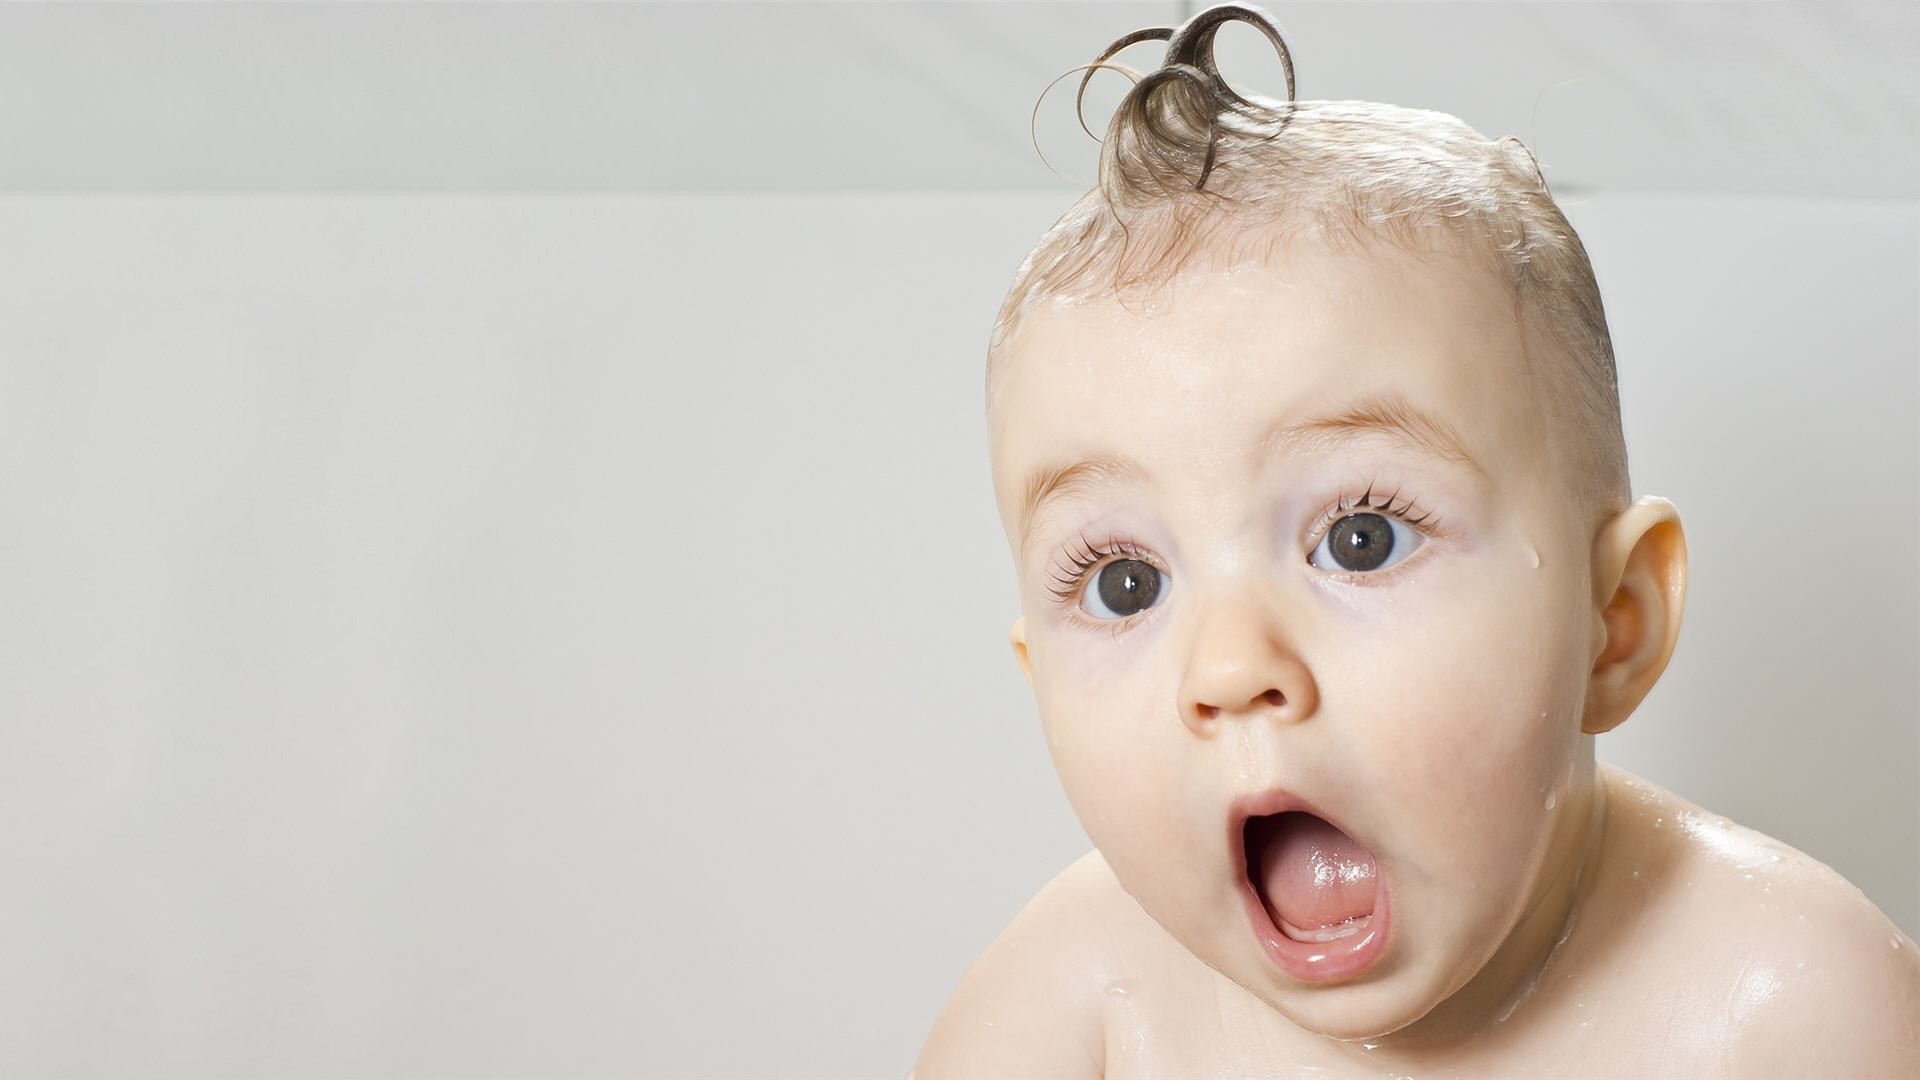 Cute Funny Baby Wallpaper Hd Free Download At Heroeswallpapers - Child Funny  - 1920x1080 Wallpaper 